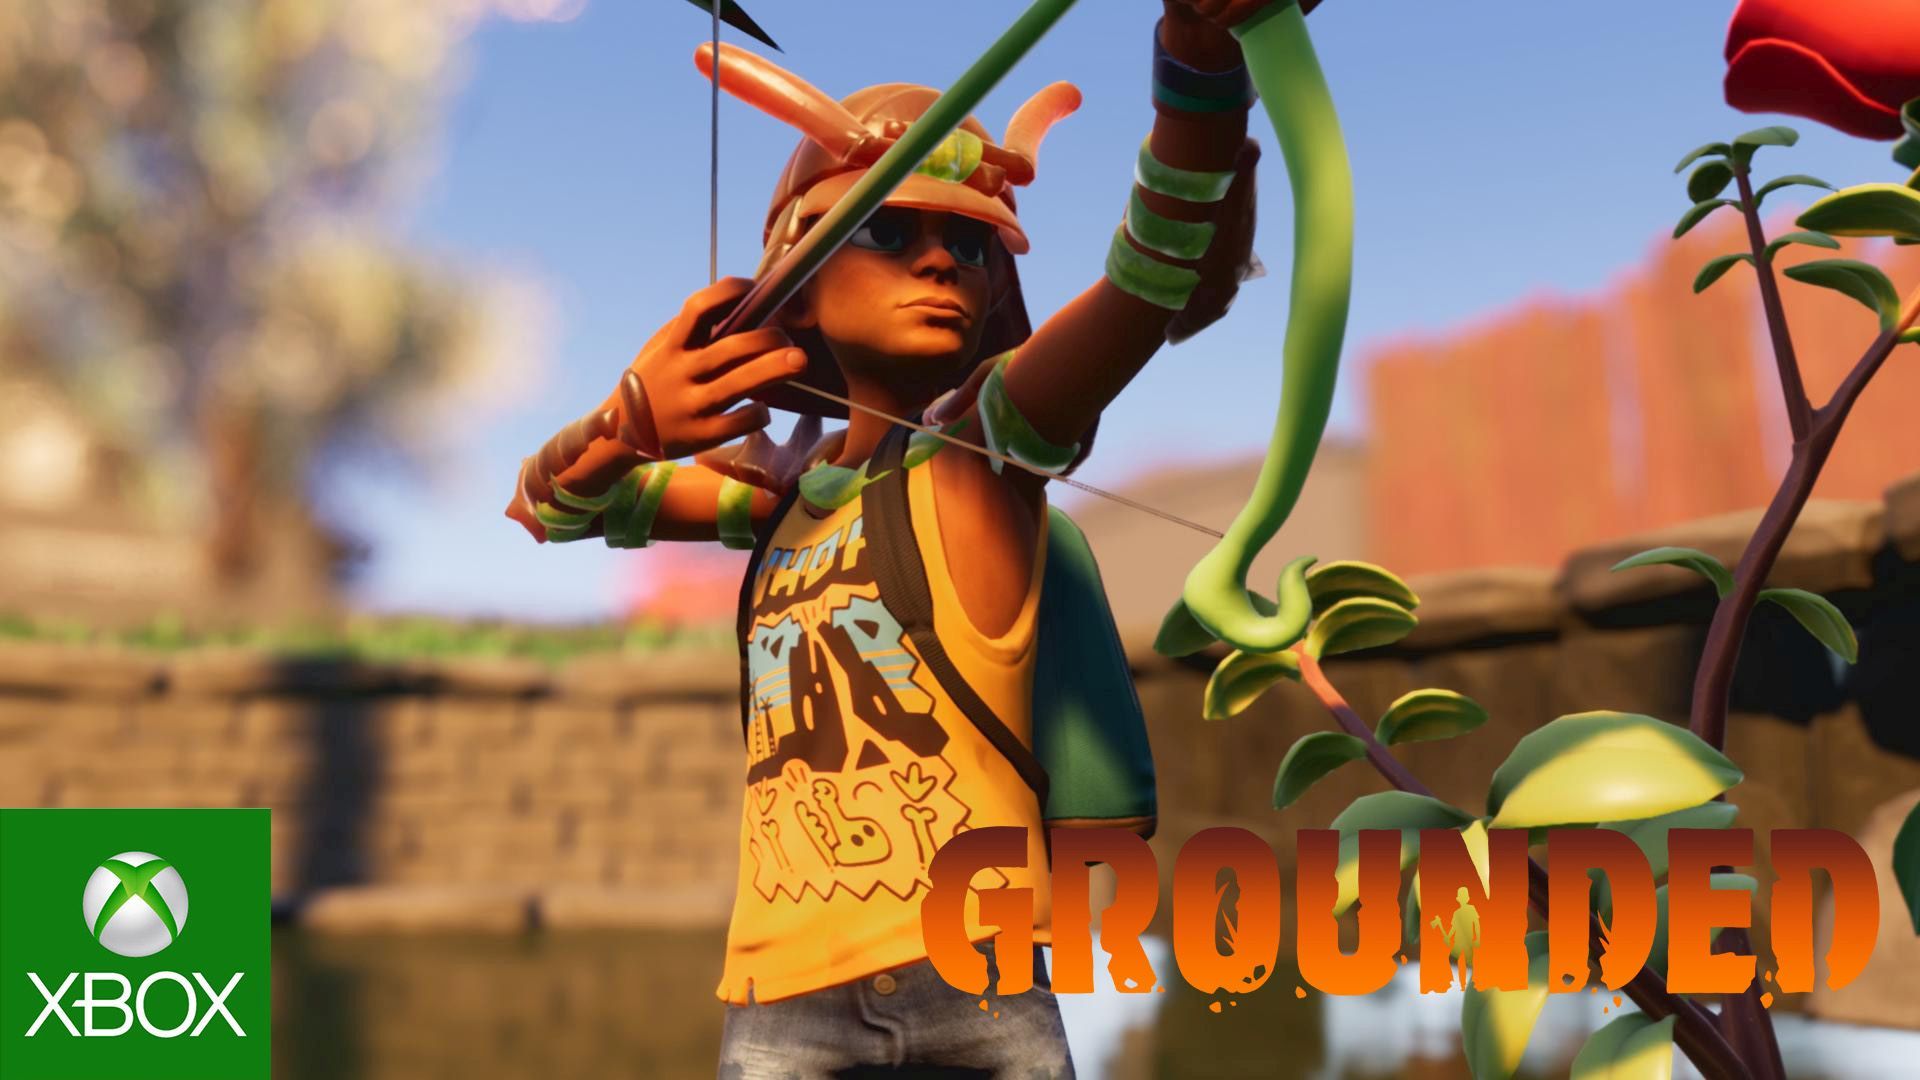 free download grounded 2022